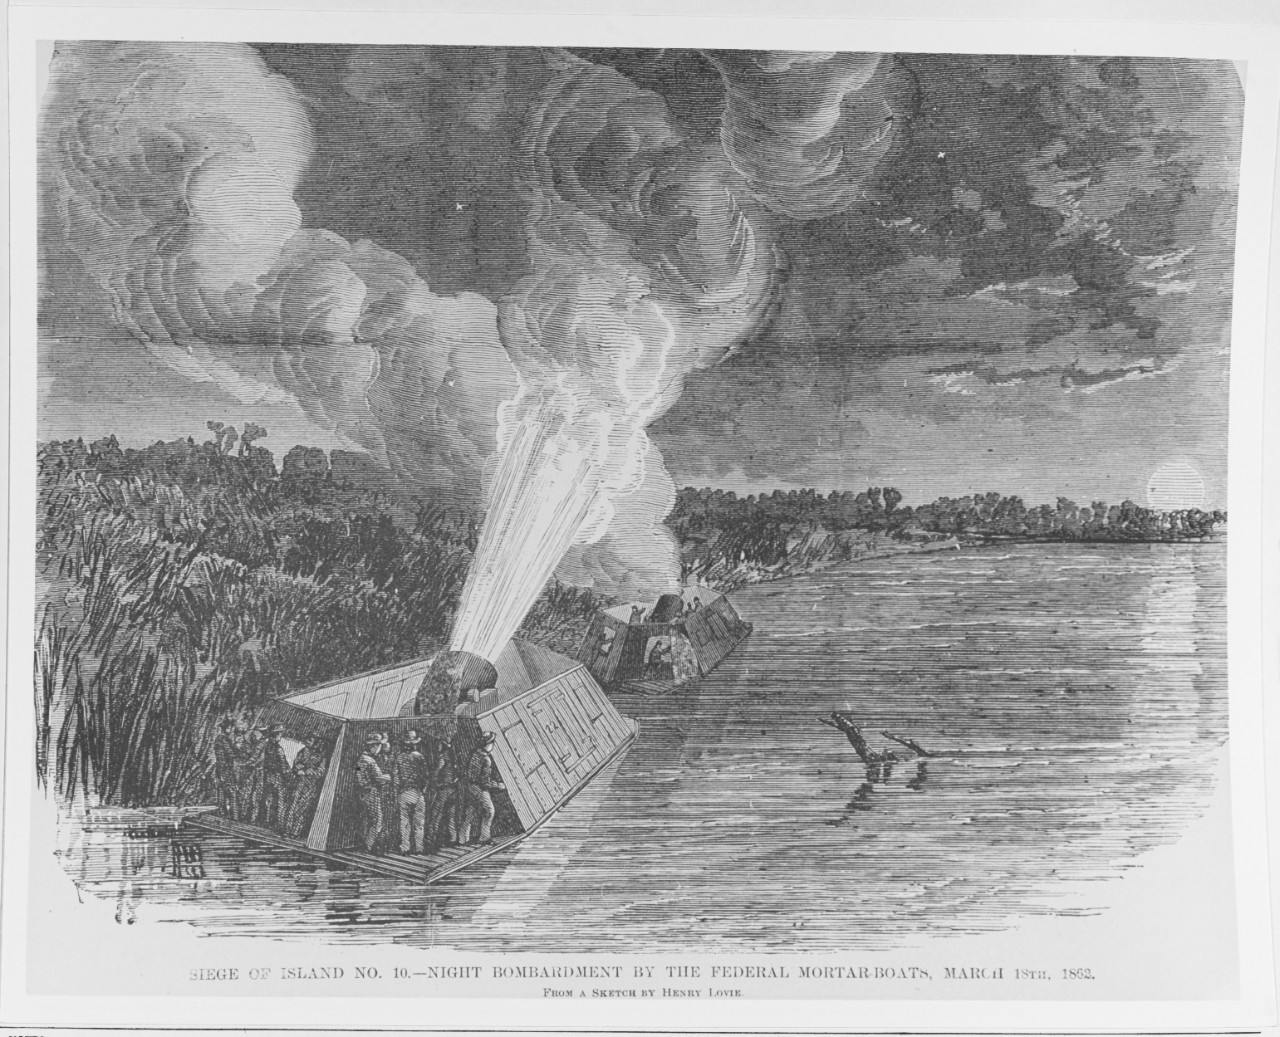 Bombardment of Island Number Ten by Union Mortar Boats